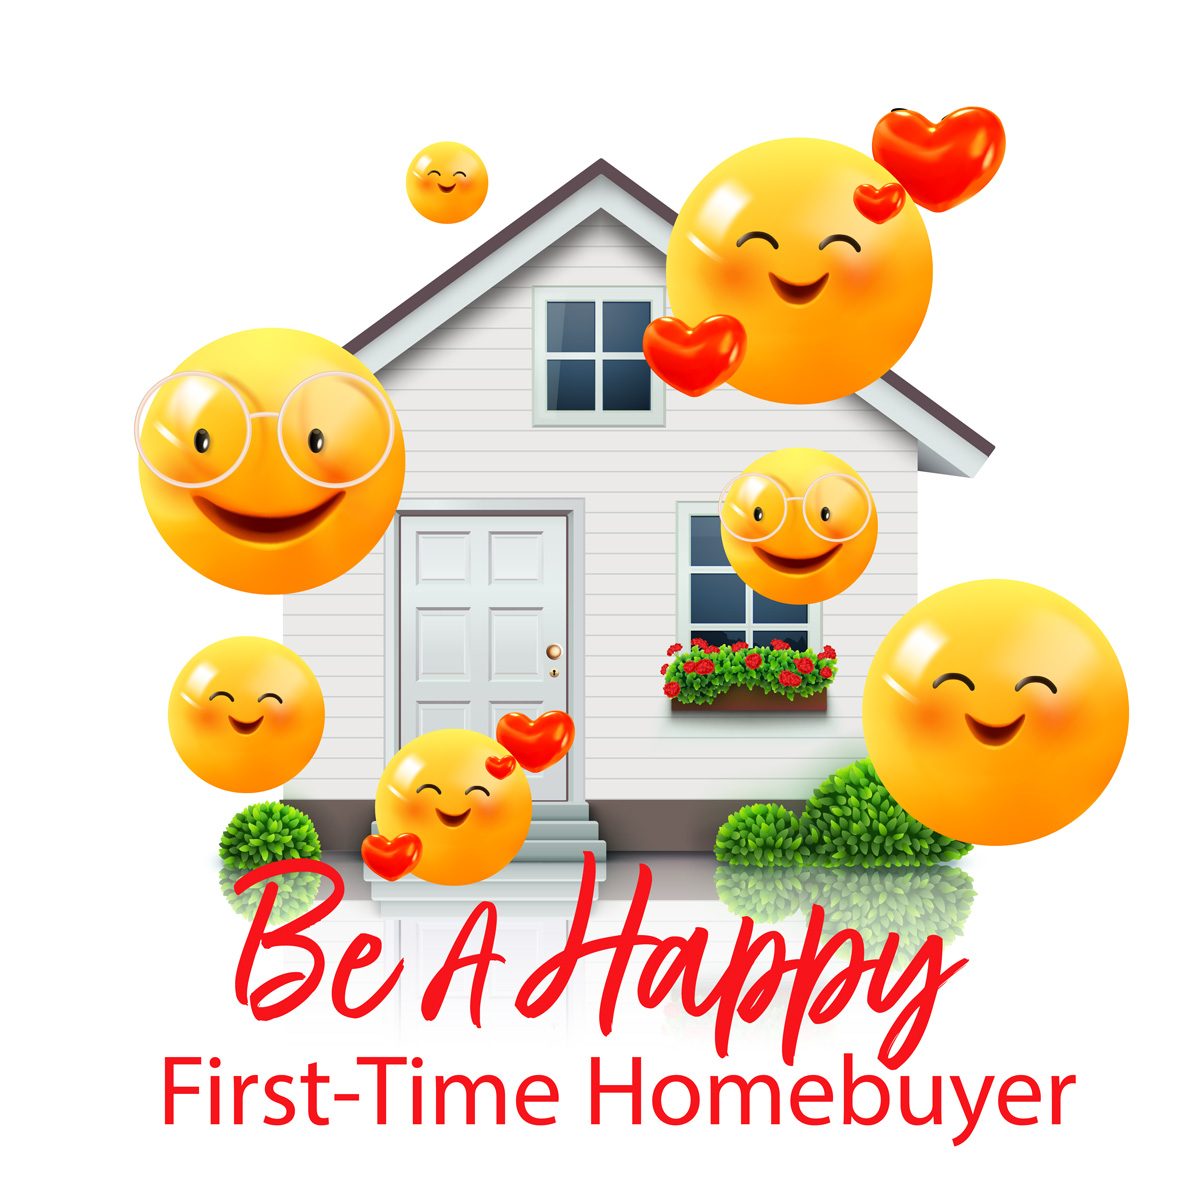 Being a happy homeowner starts with a great homebuying experience. I specialize in helping people purchase homes and provide a wide range of options, including first-time homebuyer incentive programs. Call me if you're thinking about buying.